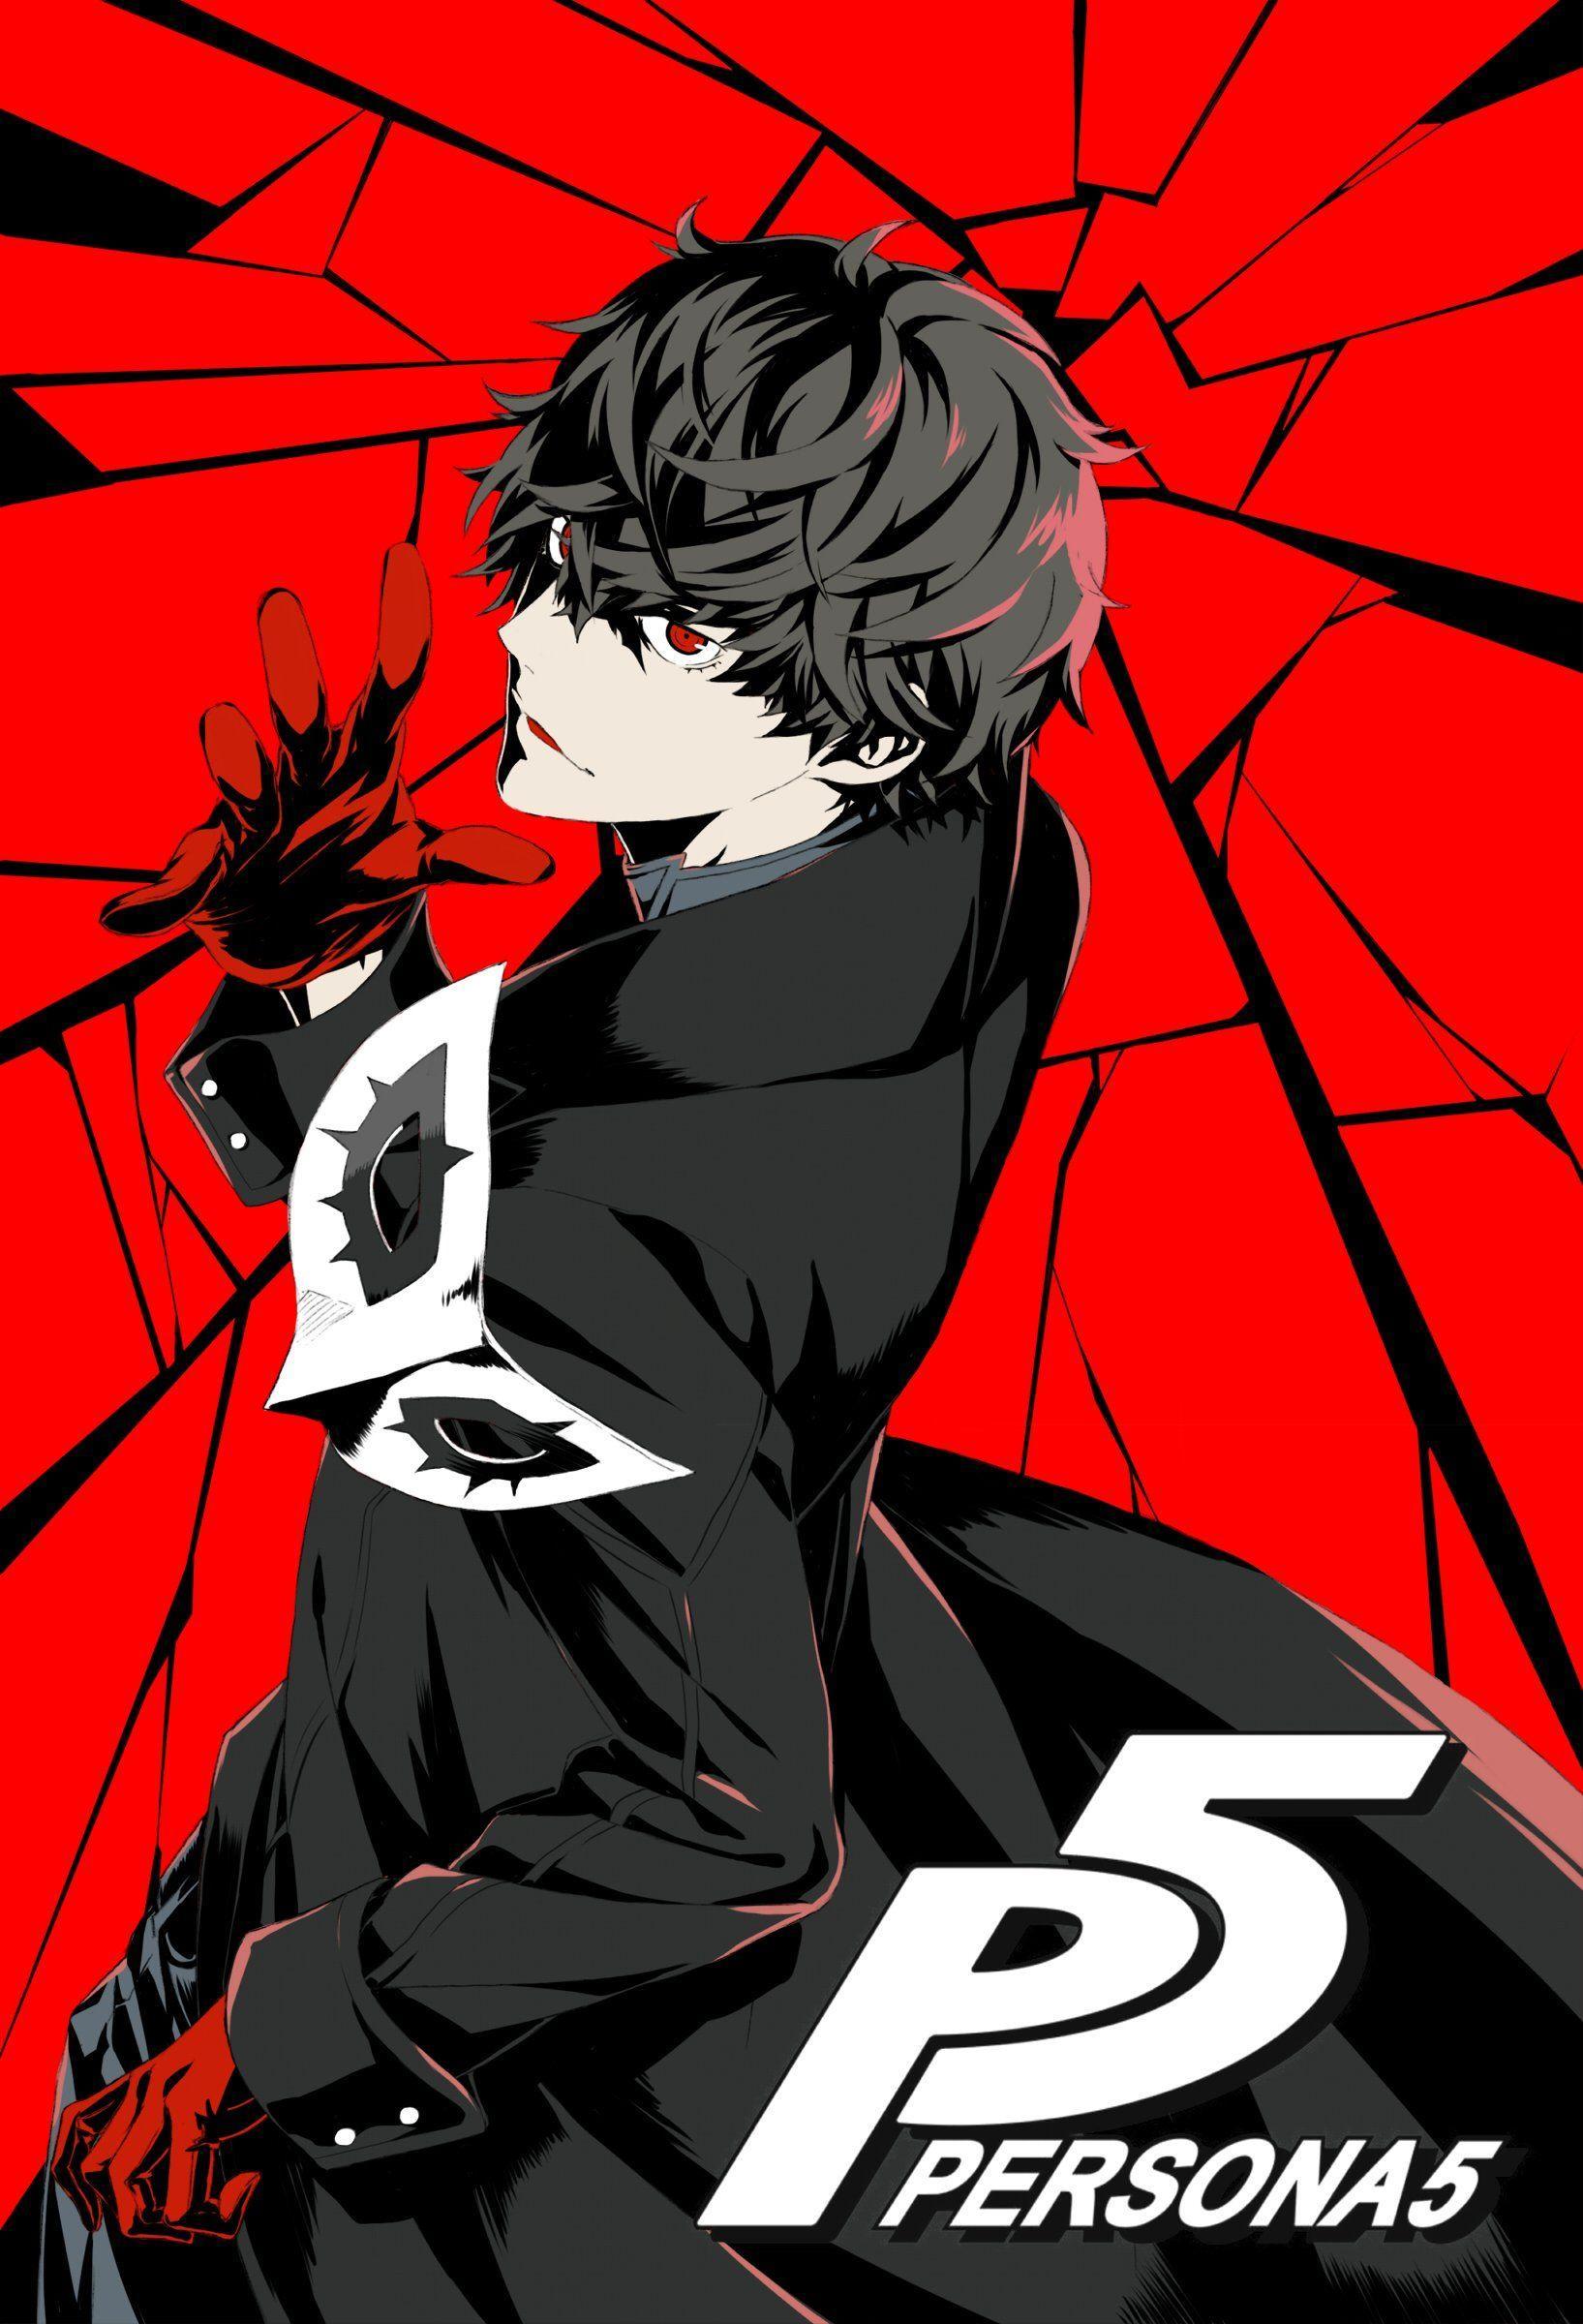 Persona 5 Hd Wallpapers 4k